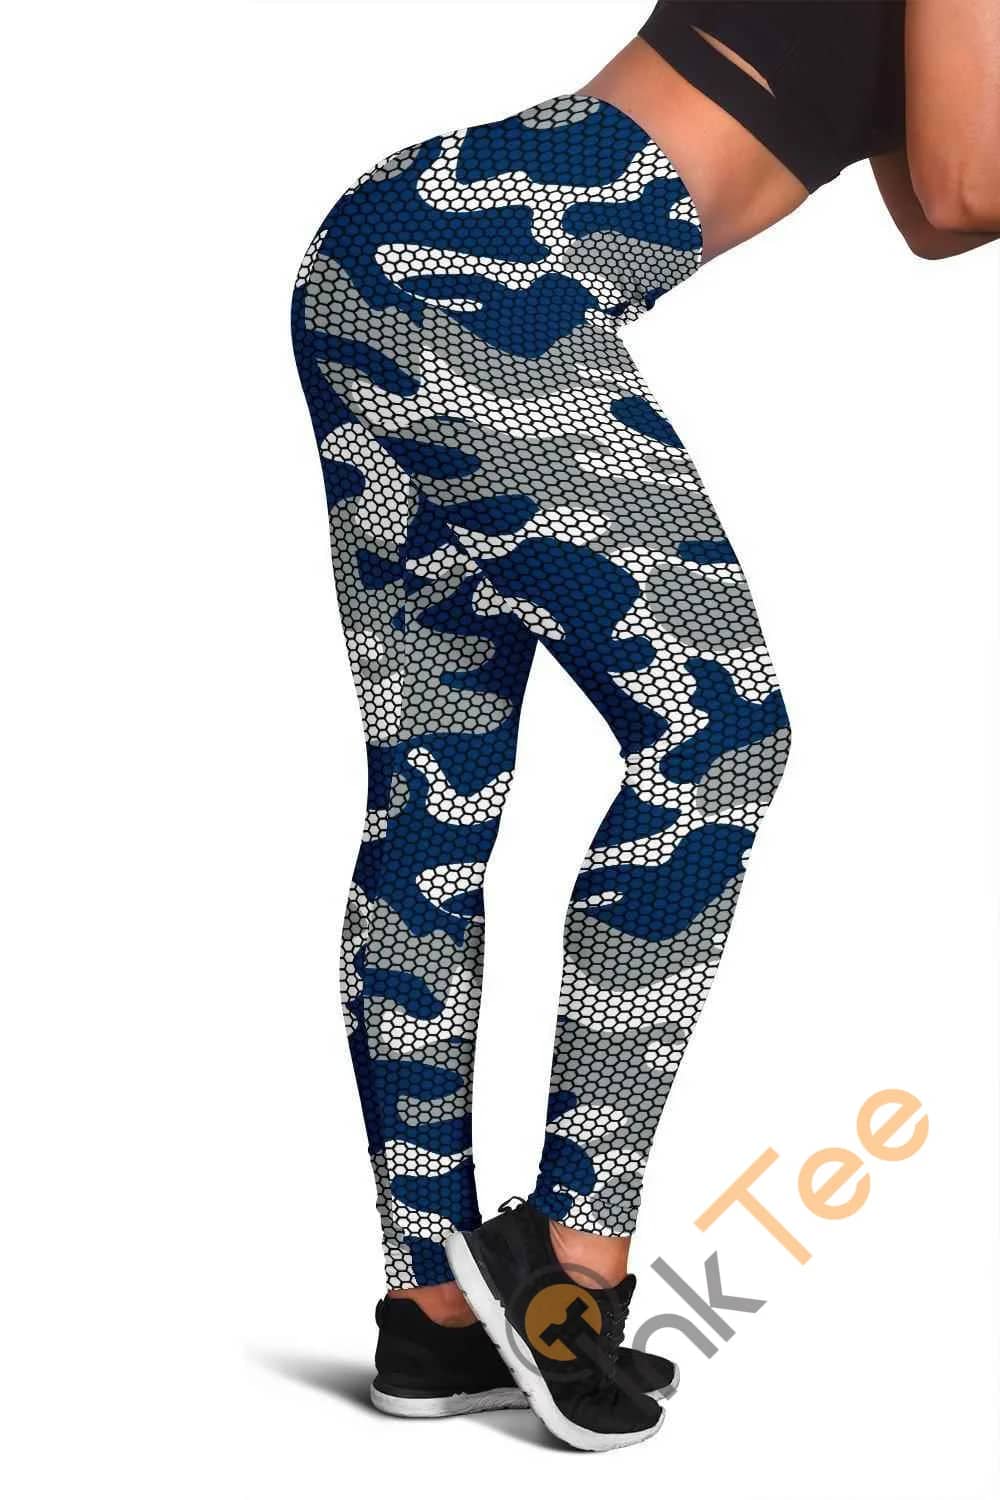 Indianapolis Colts Inspired Hex Camo 3D All Over Print For Yoga Fitness Fashion Women's Leggings